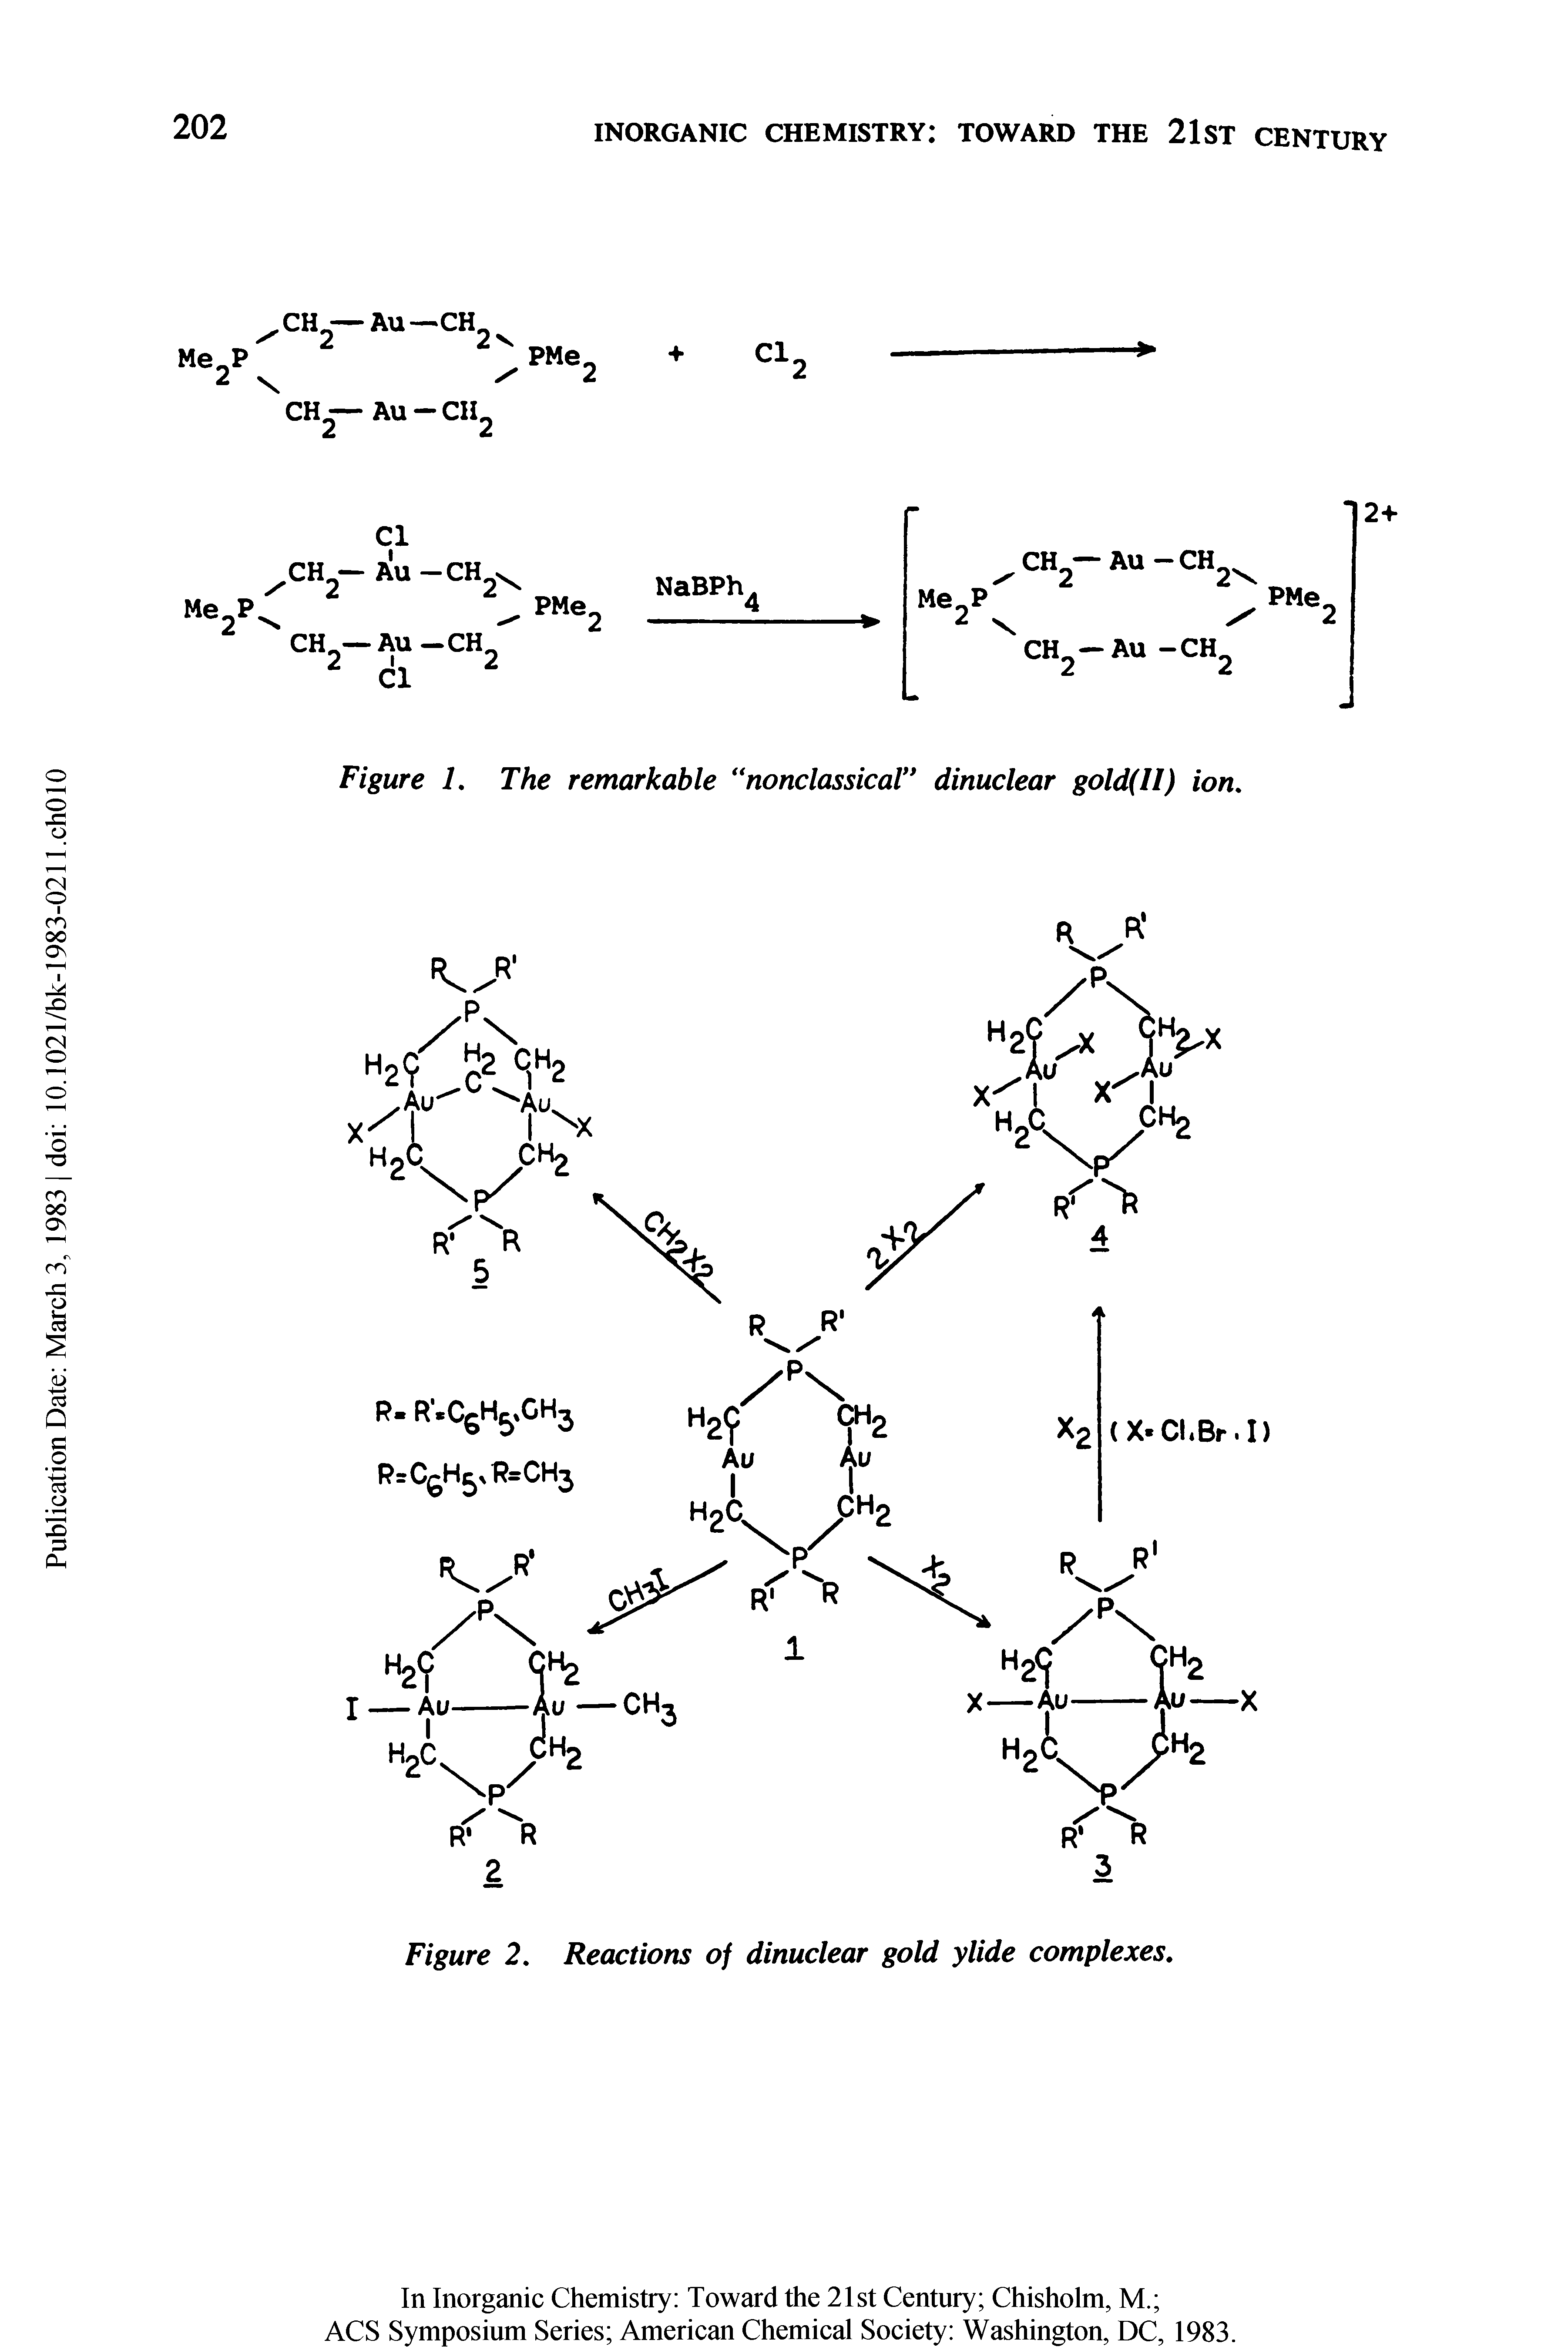 Figure 2. Reactions of dinuclear gold ylide complexes.